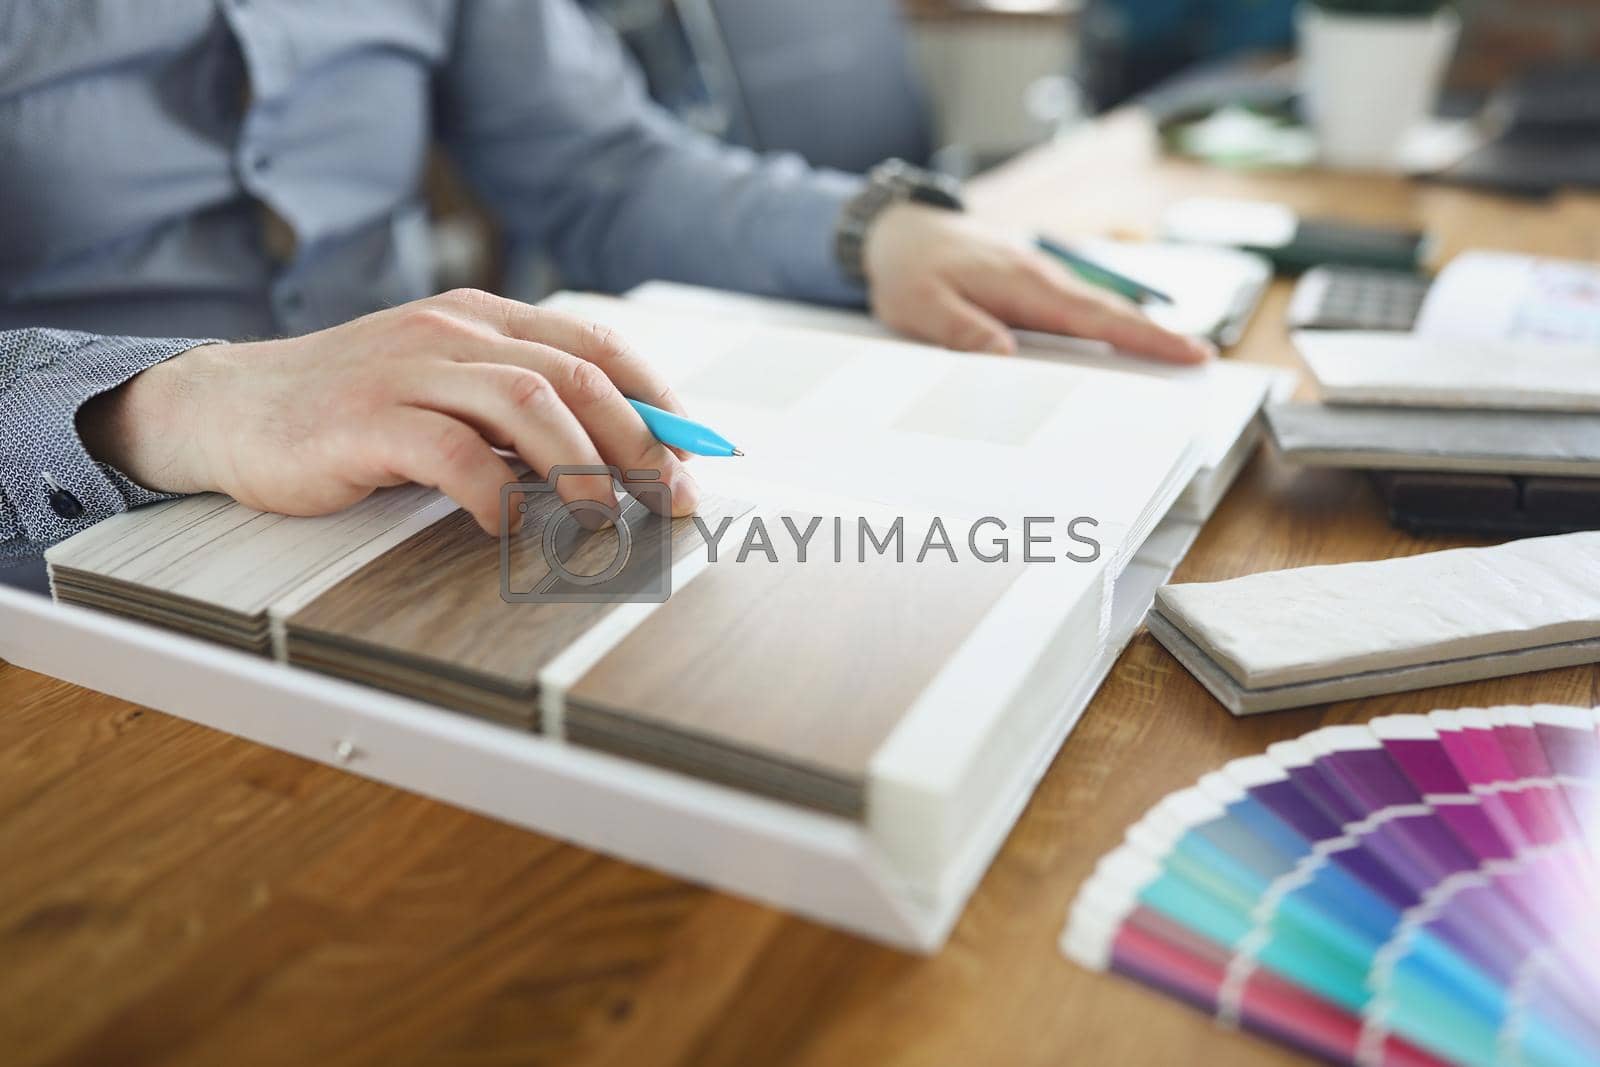 Royalty free image of Talented design studio worker in office by kuprevich